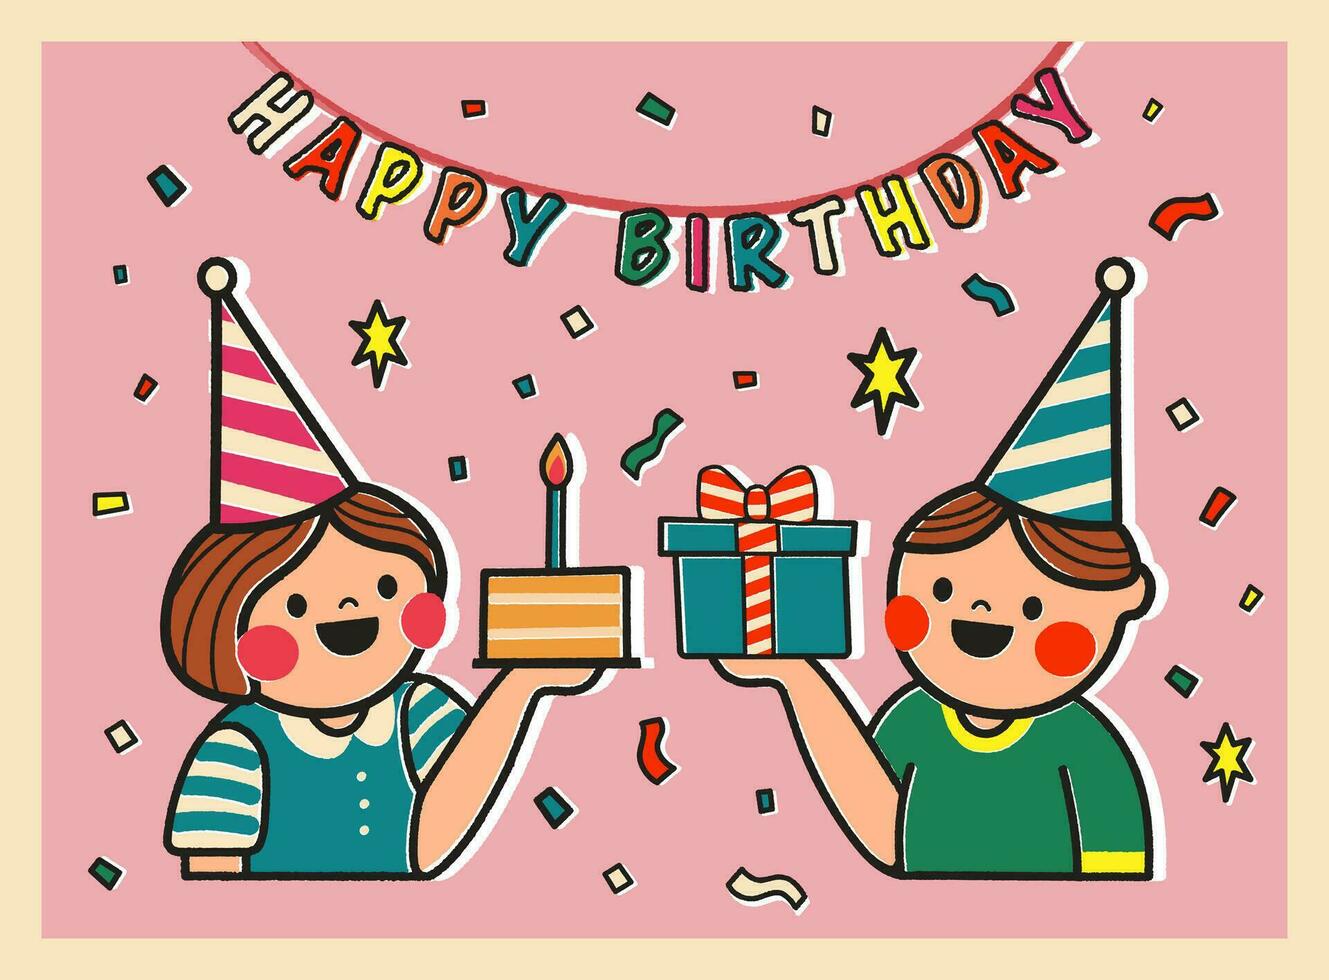 Happy birthday card with cartoon boy and girl holding a gift and cake illustration on pink background. Sticker style greeting card in retro style. Cute postcard for child or design for your brand. vector